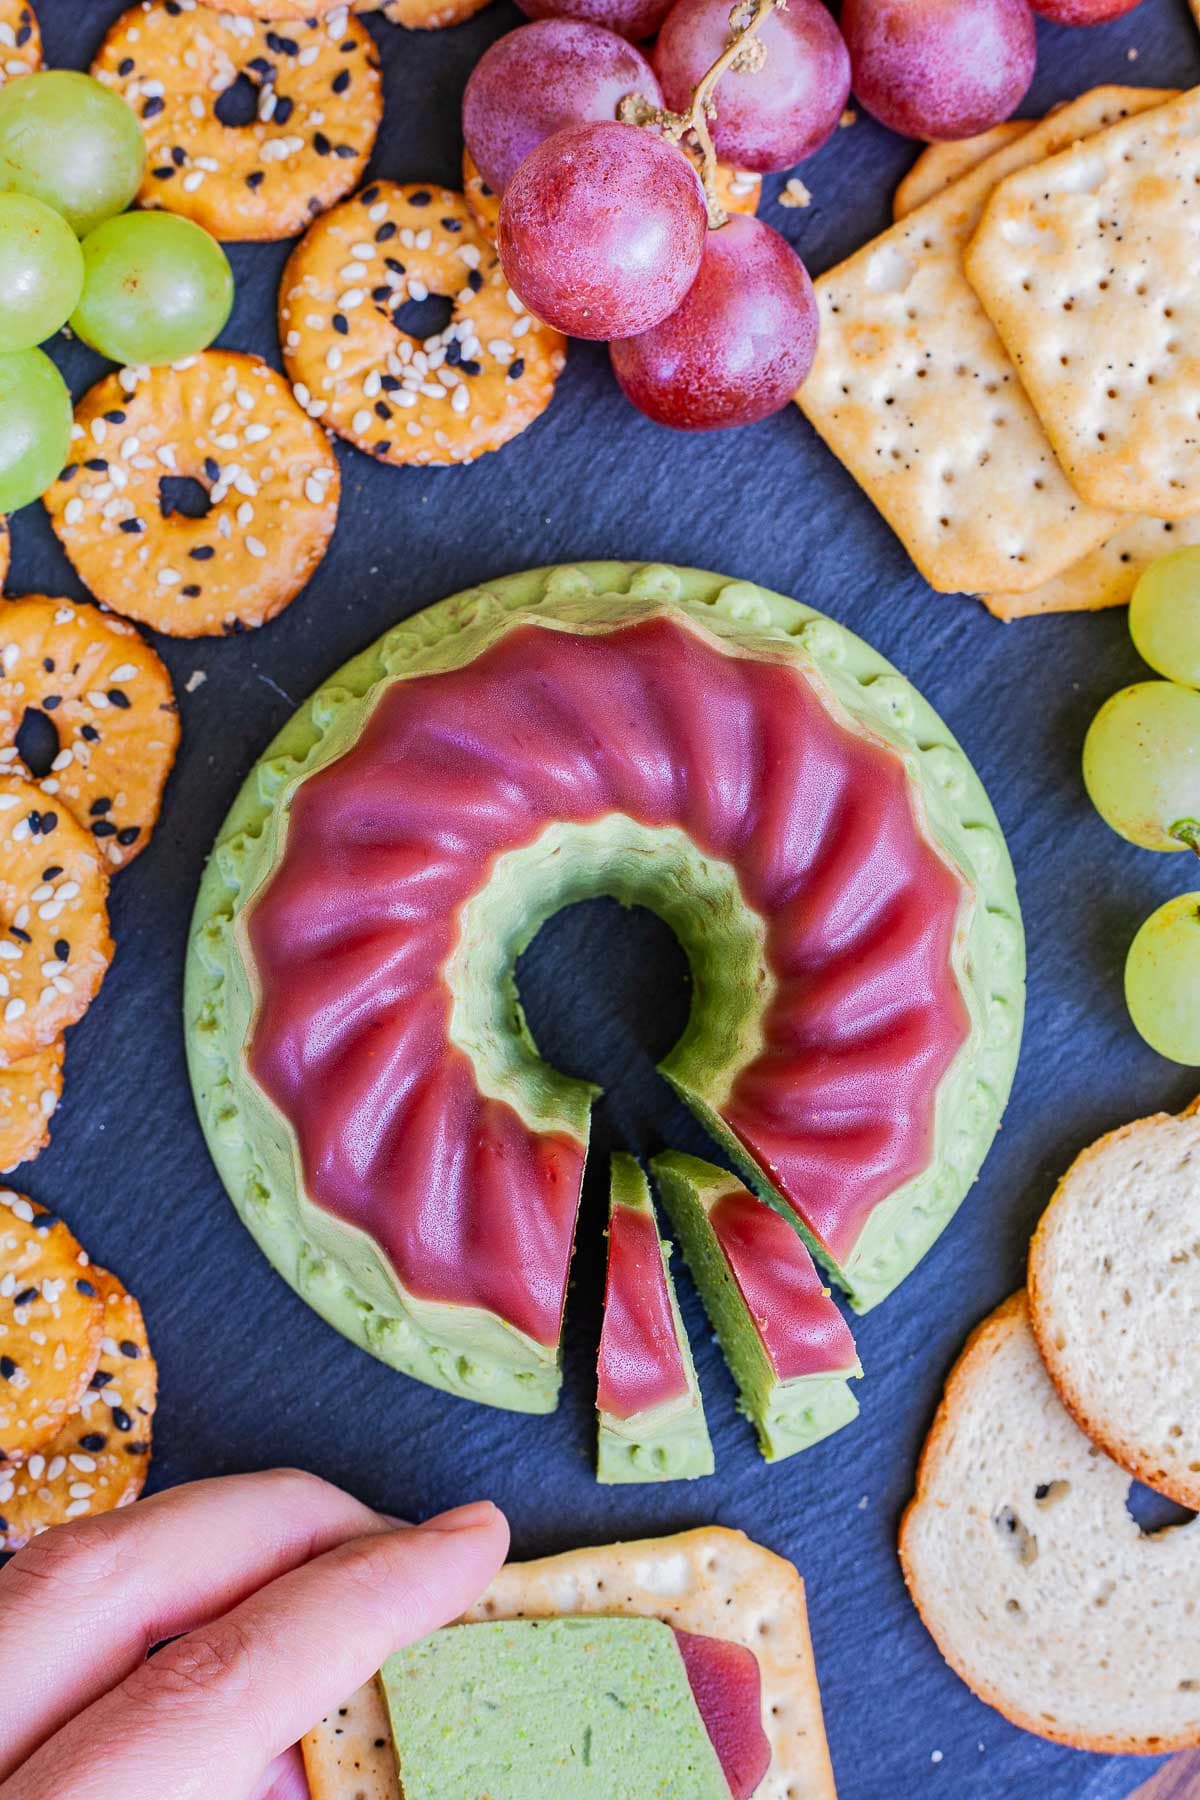 Green cheese shaped as a bundt topped with dark pink jelly. It is surrounded by grapes and different crackers. A hand is holding one cracker in the front with one slice of green cheese on it. 